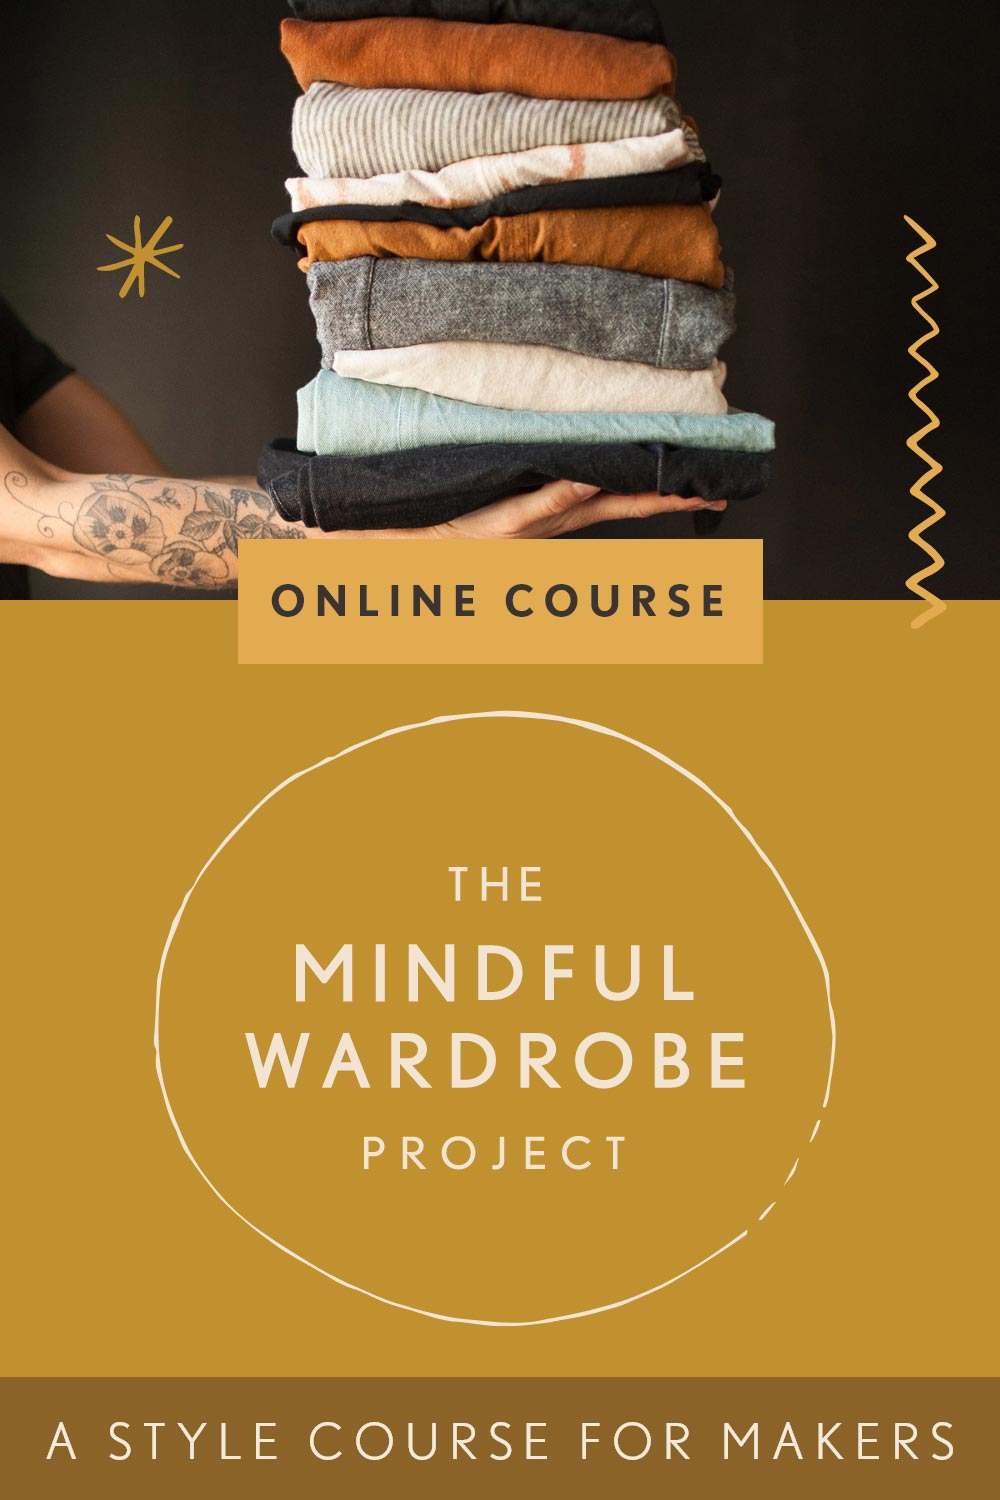 Mindful Wardrobe style course for makers, featuring a folded stack of handmade clothes